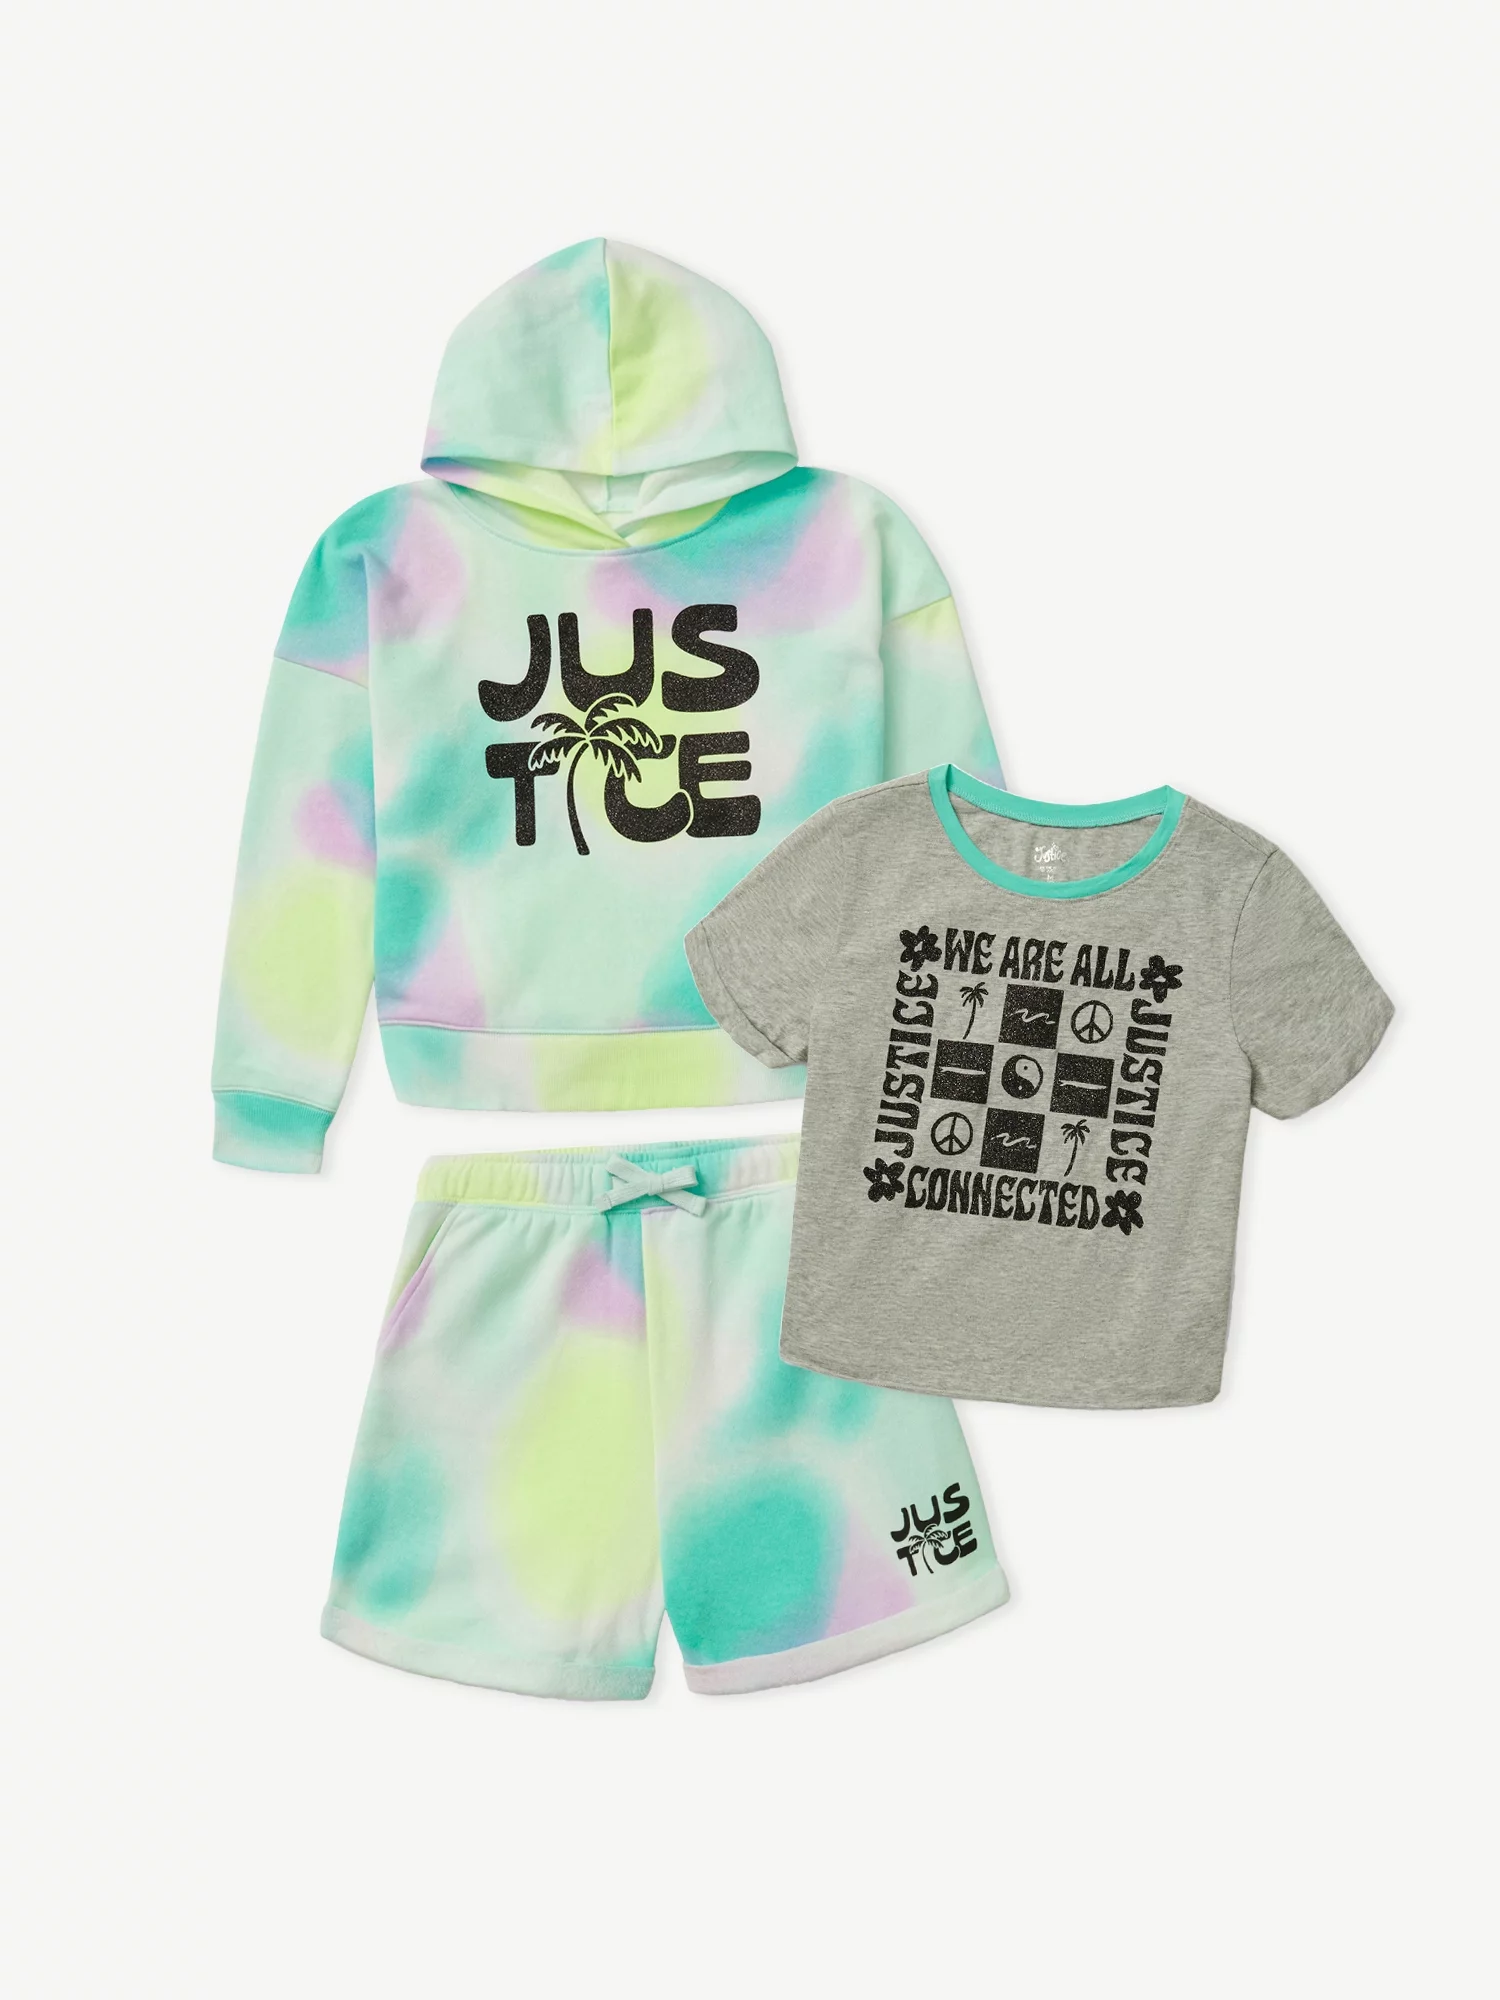 Justice Girls Everyday Faves Outfit Set, 3-Piece, Sizes XS-XL & Plus